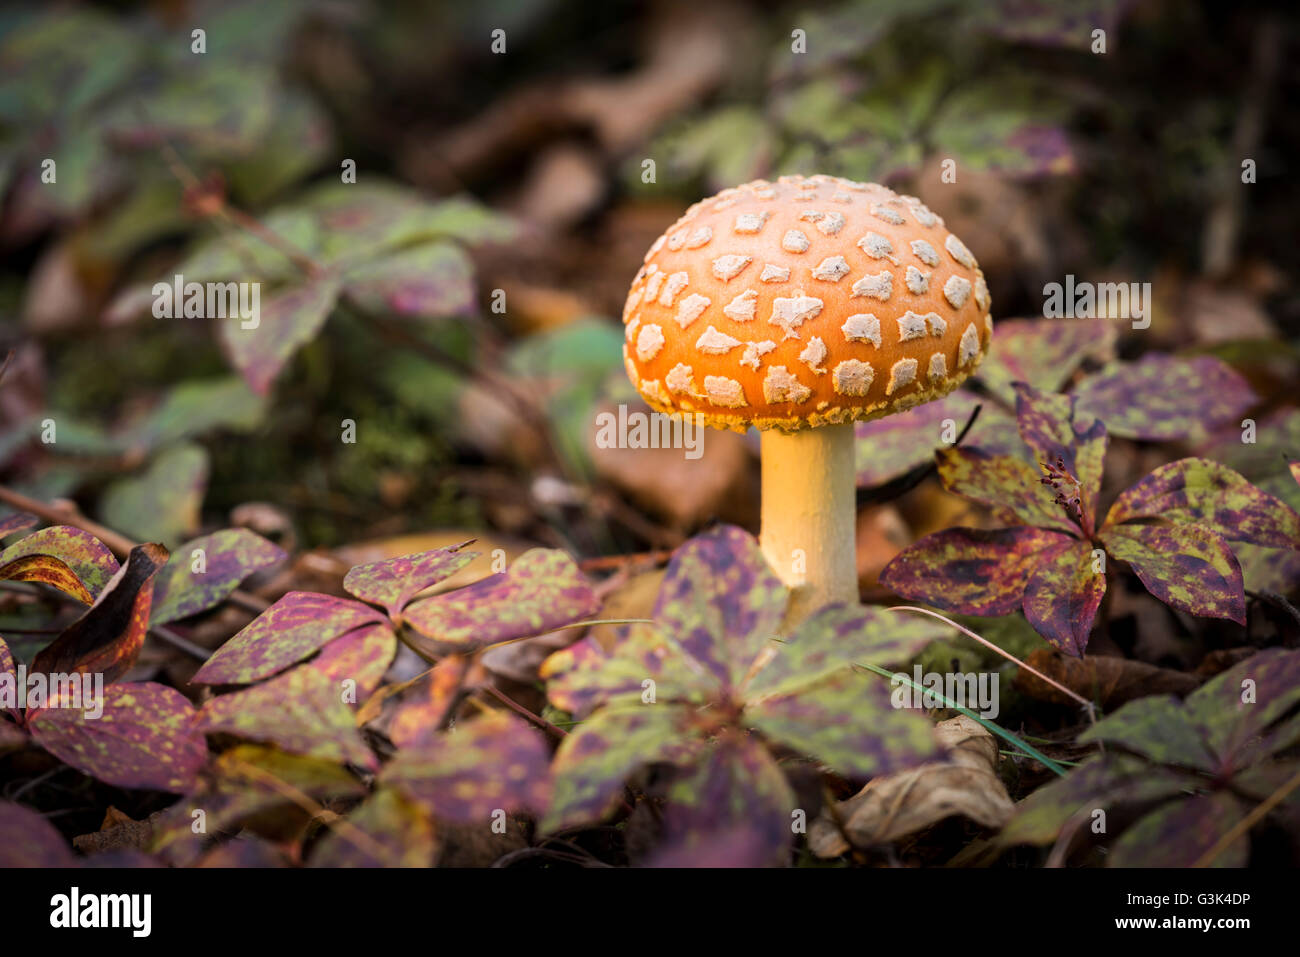 Amanita muscaria, commonly known as the fly agaric or fly amanita, is a mushroom and psychoactive basidiomycete fungus, one of m Stock Photo